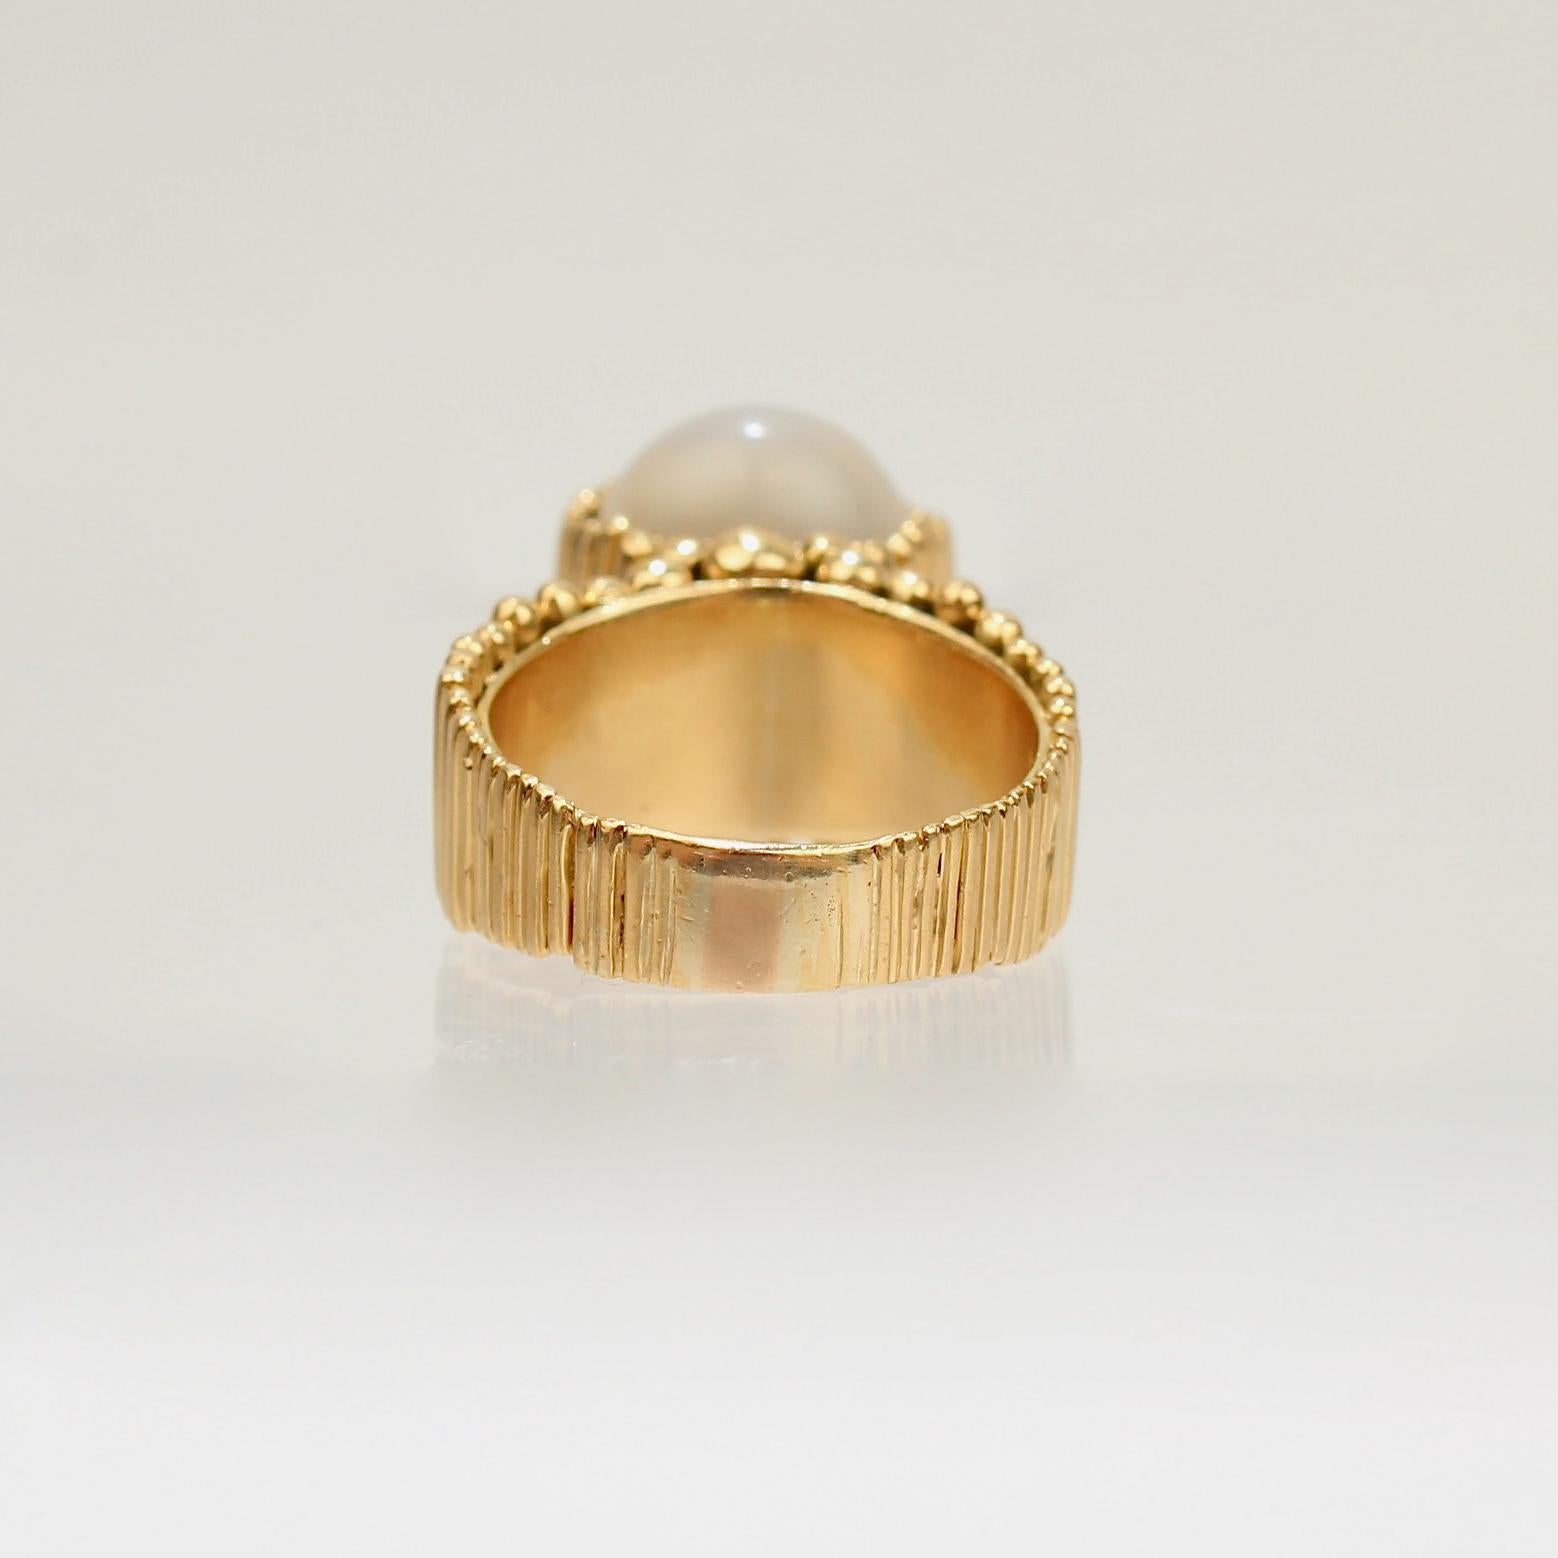 Bead Signed Space Age 18 Karat Gold and Moonstone Cocktail Ring by F. J. Cooper